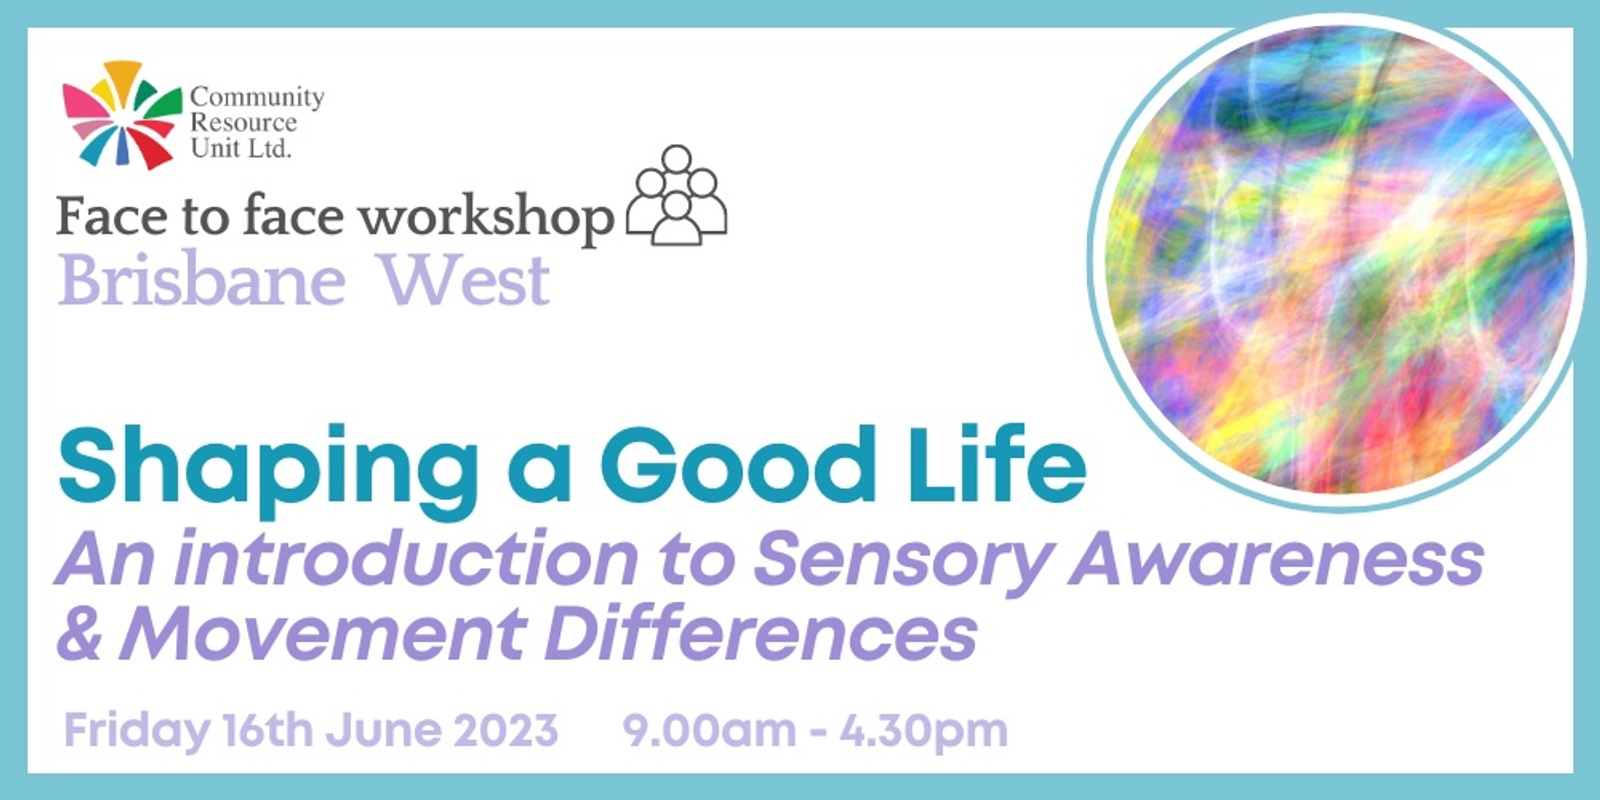 Brisbane: Shaping a Good Life - An Introduction to Sensory Awareness & Movement Differences